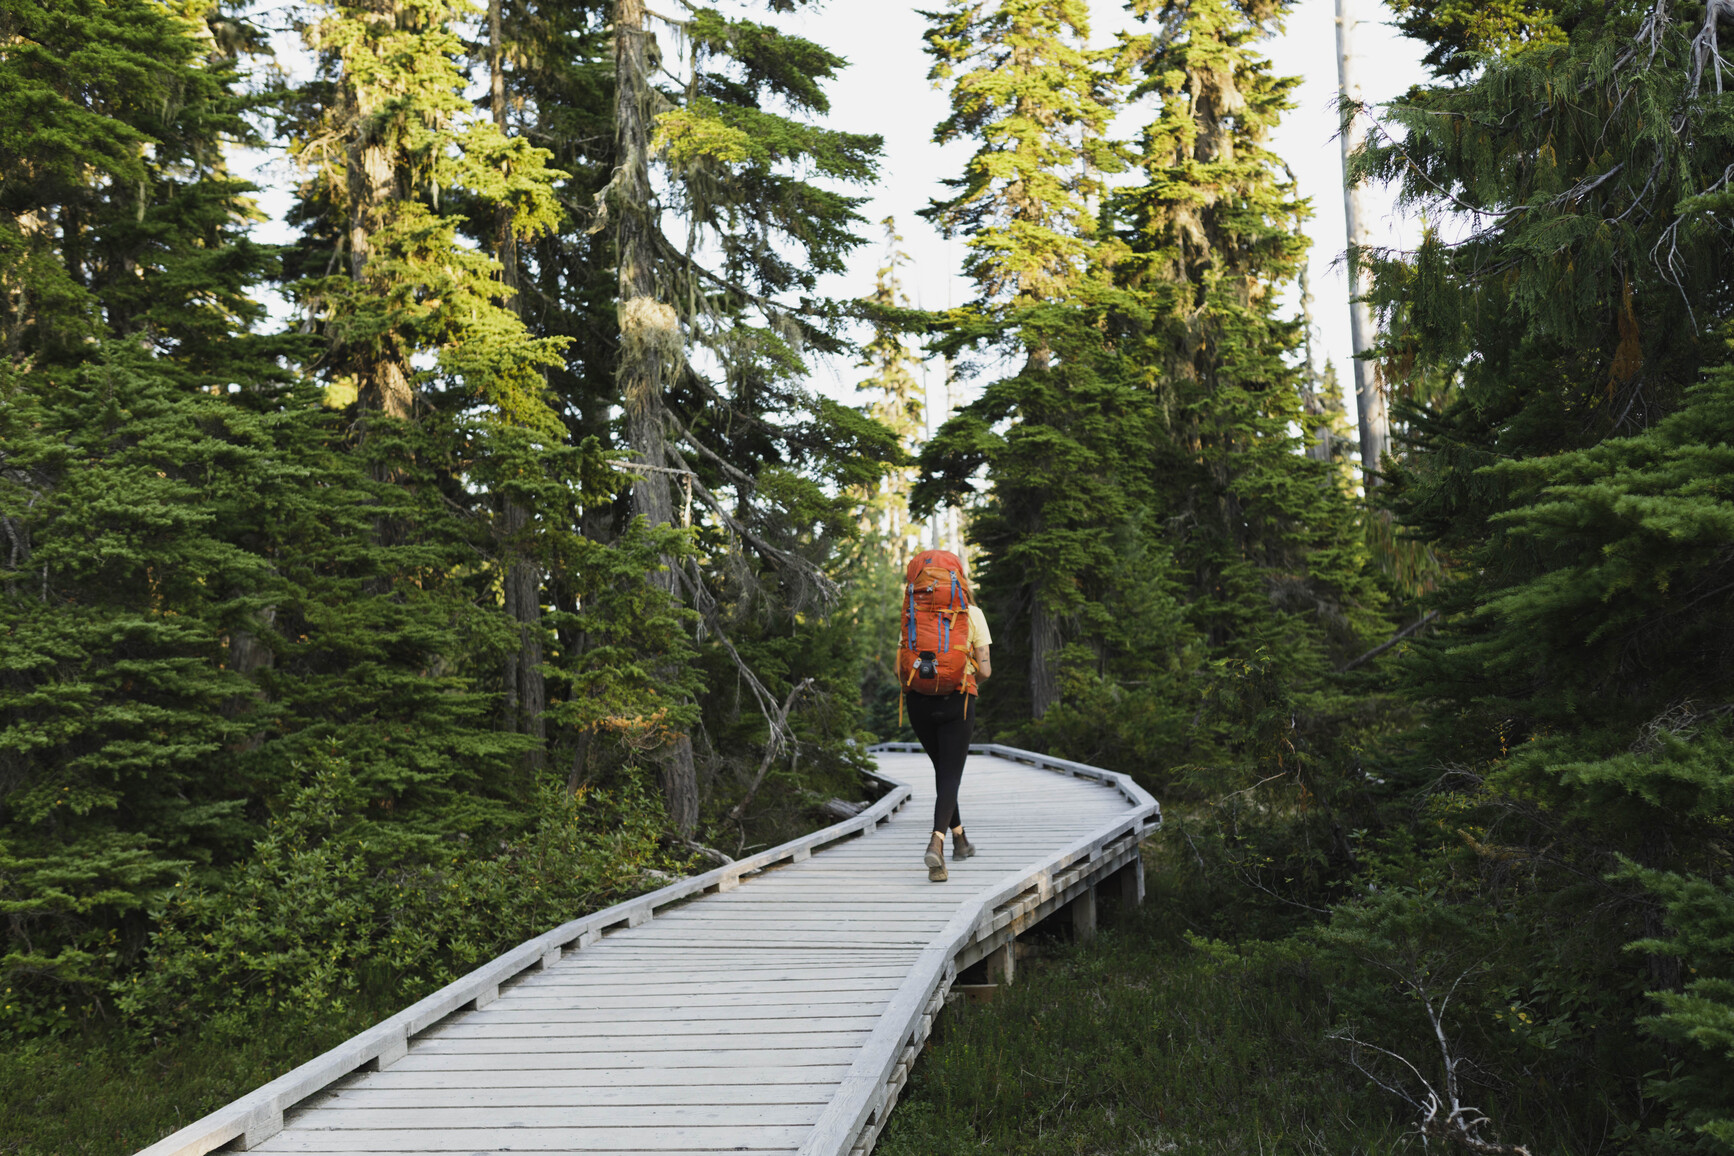 A park visitor hiking along a boardwalk in Strathcona Park.